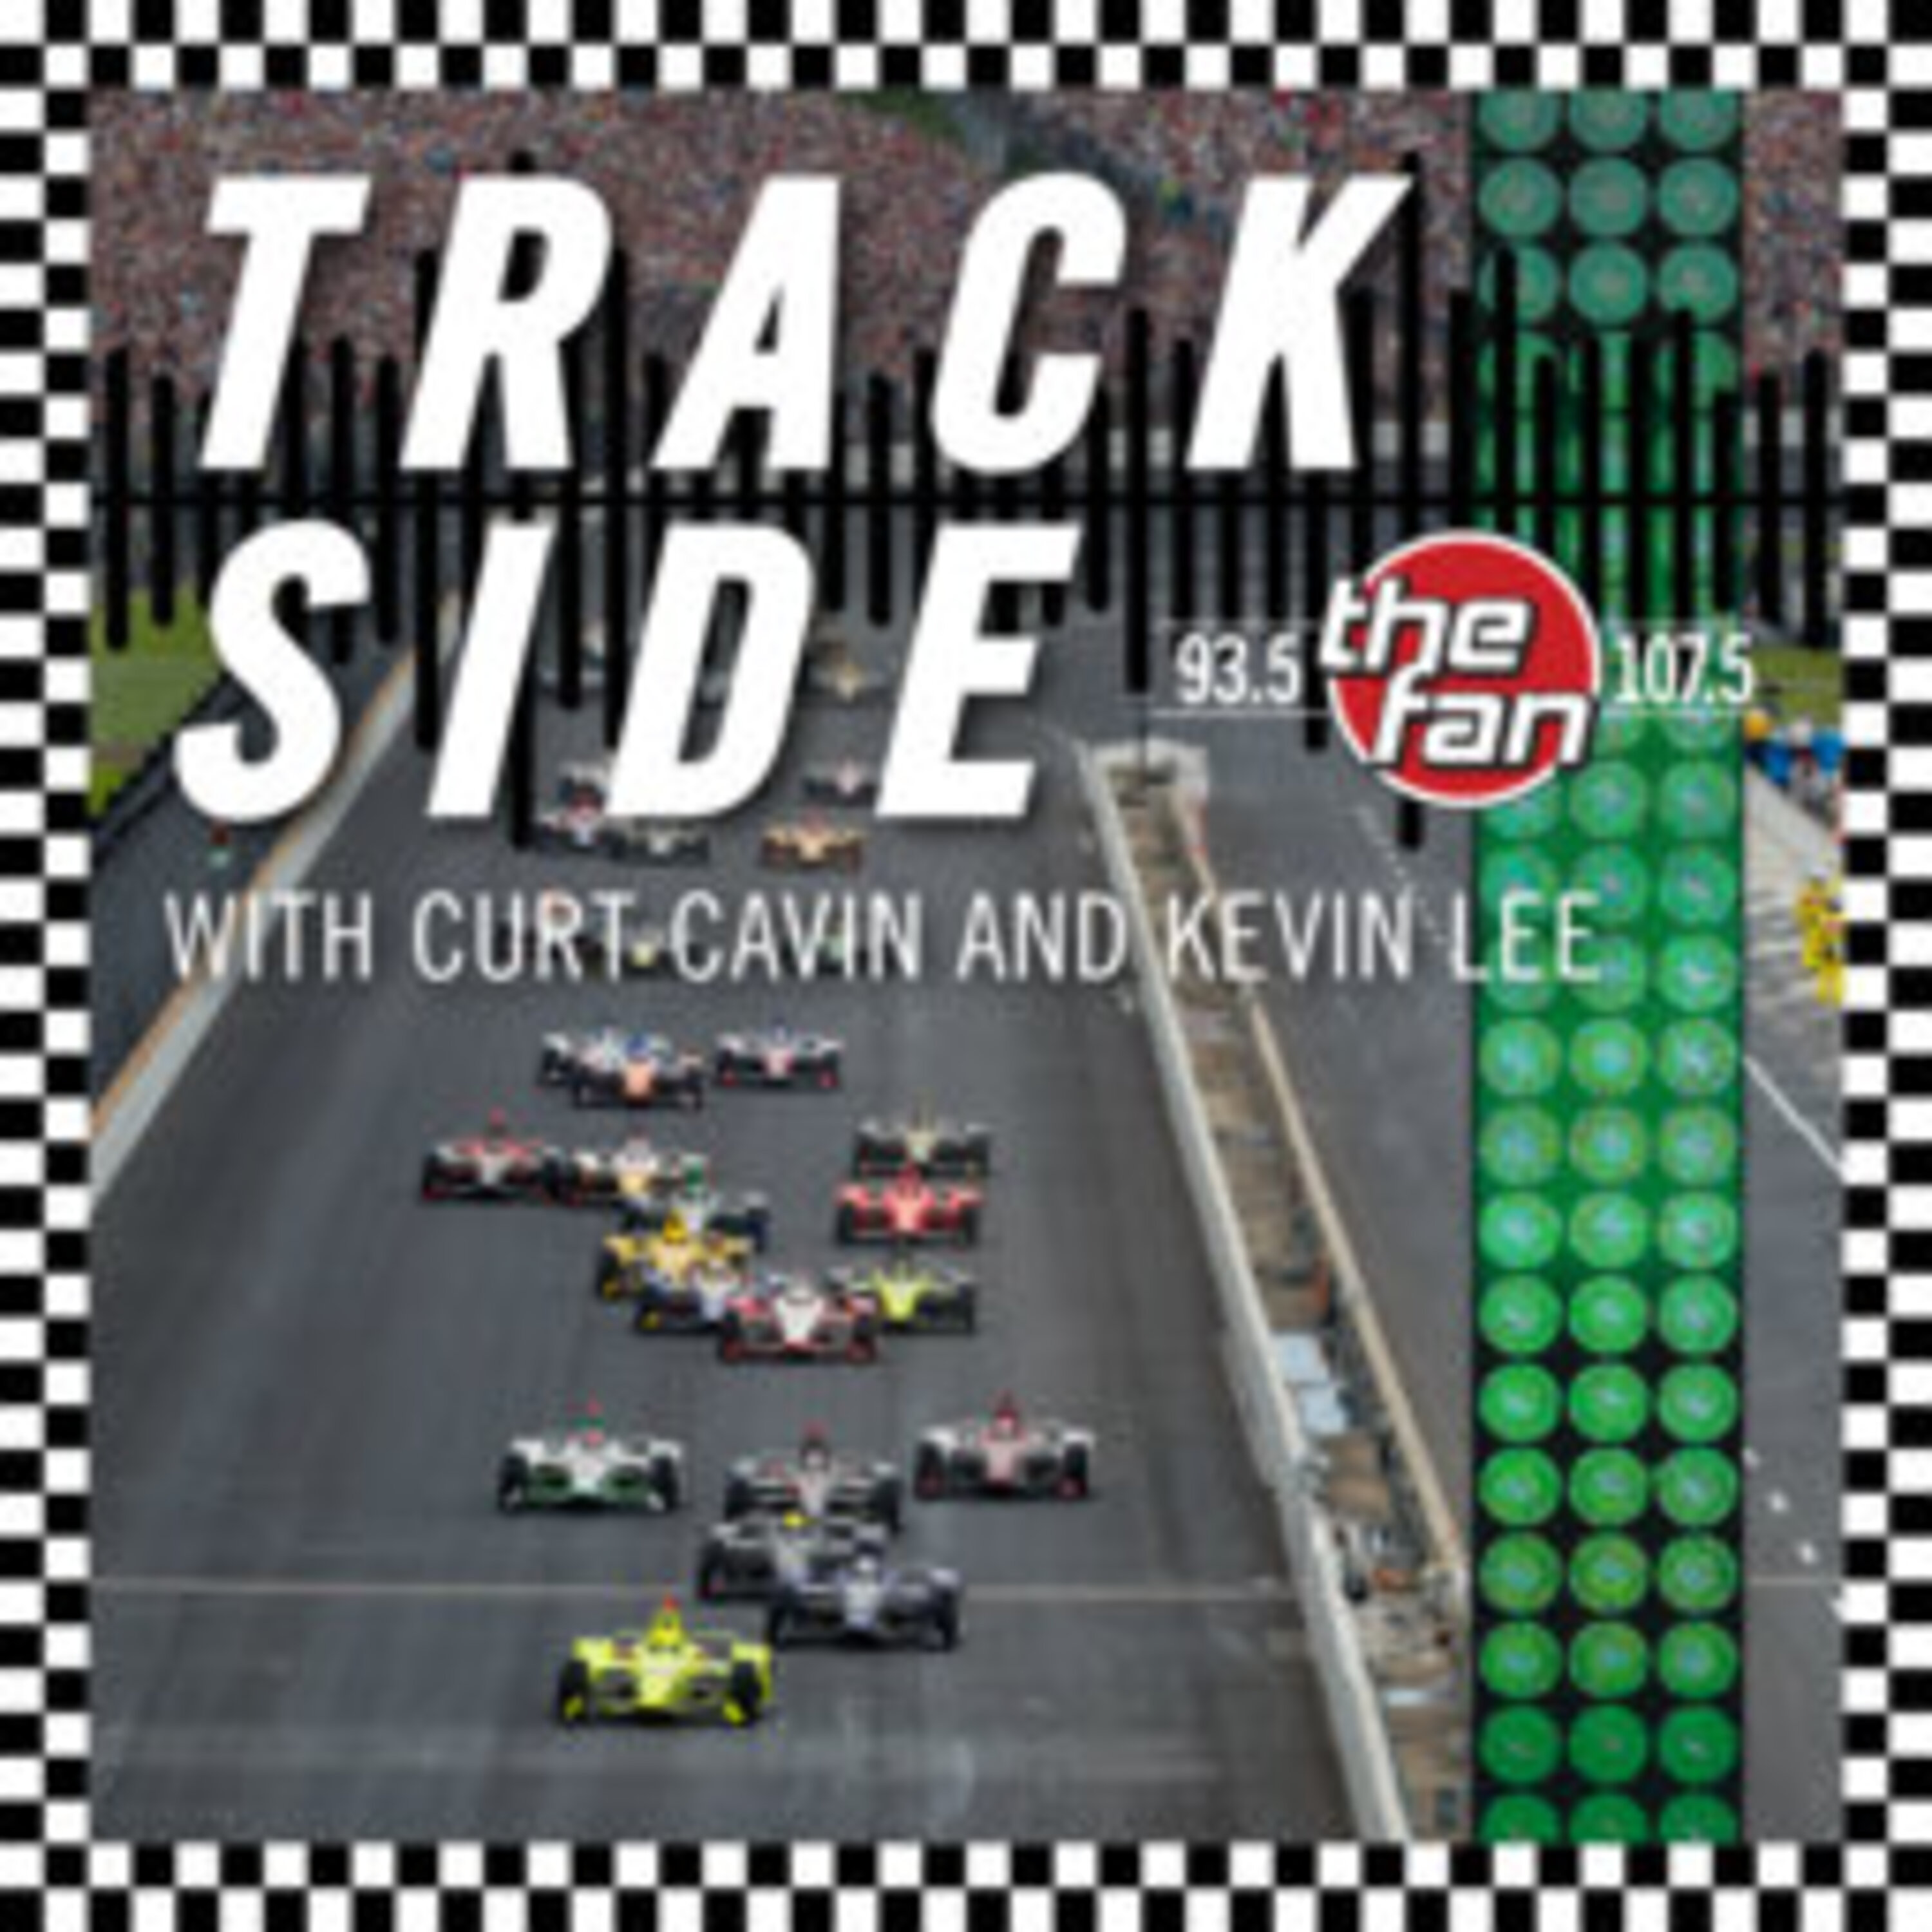 Kevin and Curt discuss IndyCar TV deals, talk to "Poppy" Popielarz about restoring old race cars, Steve Wittich, and more!